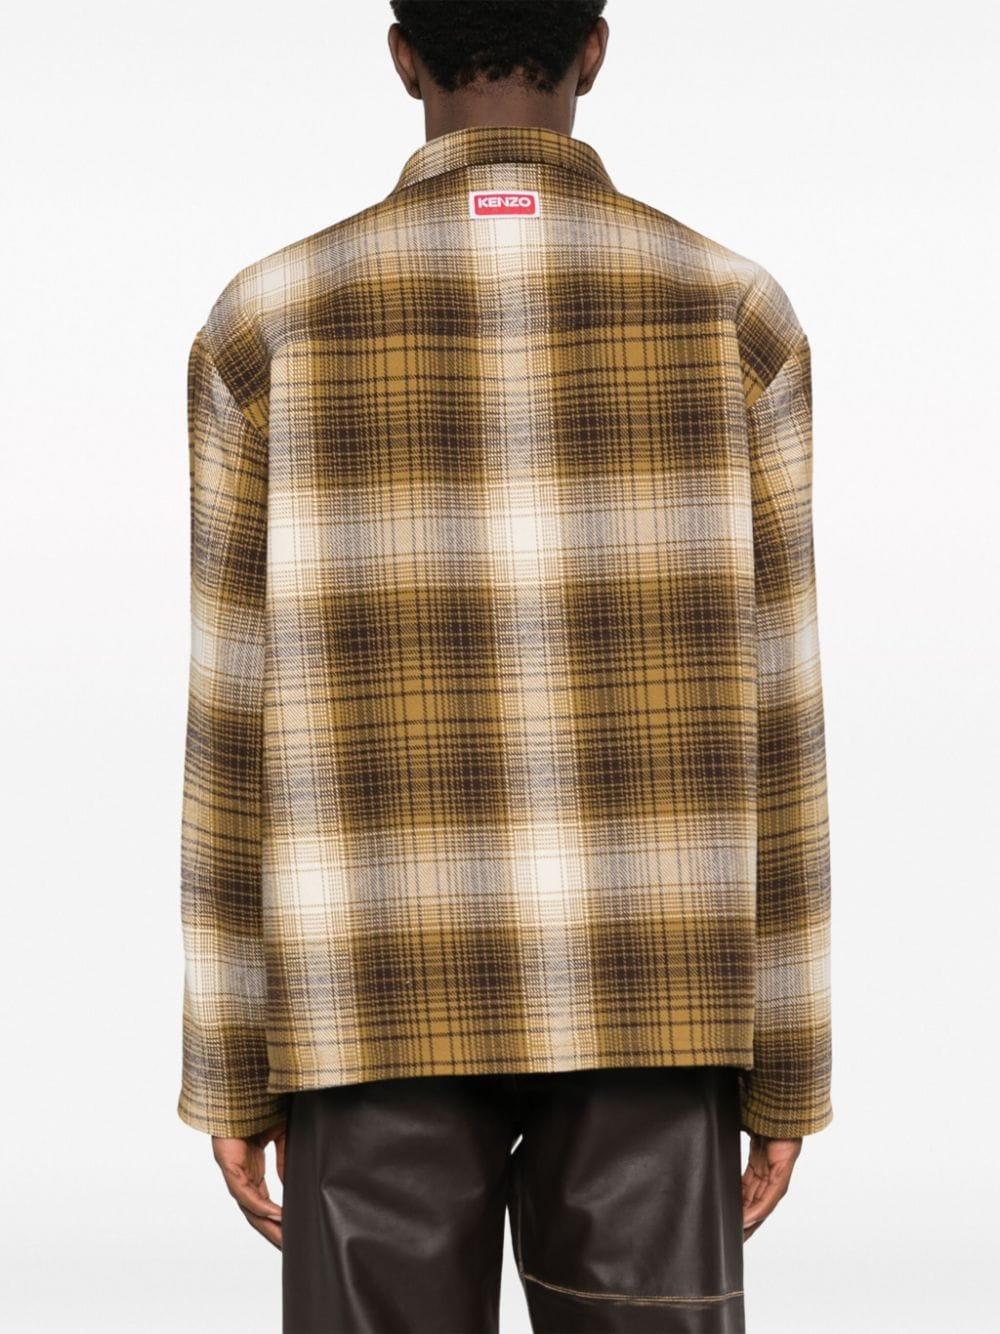 KENZO Plaid-check Cotton Shirt Jacket in Brown for Men | Lyst UK